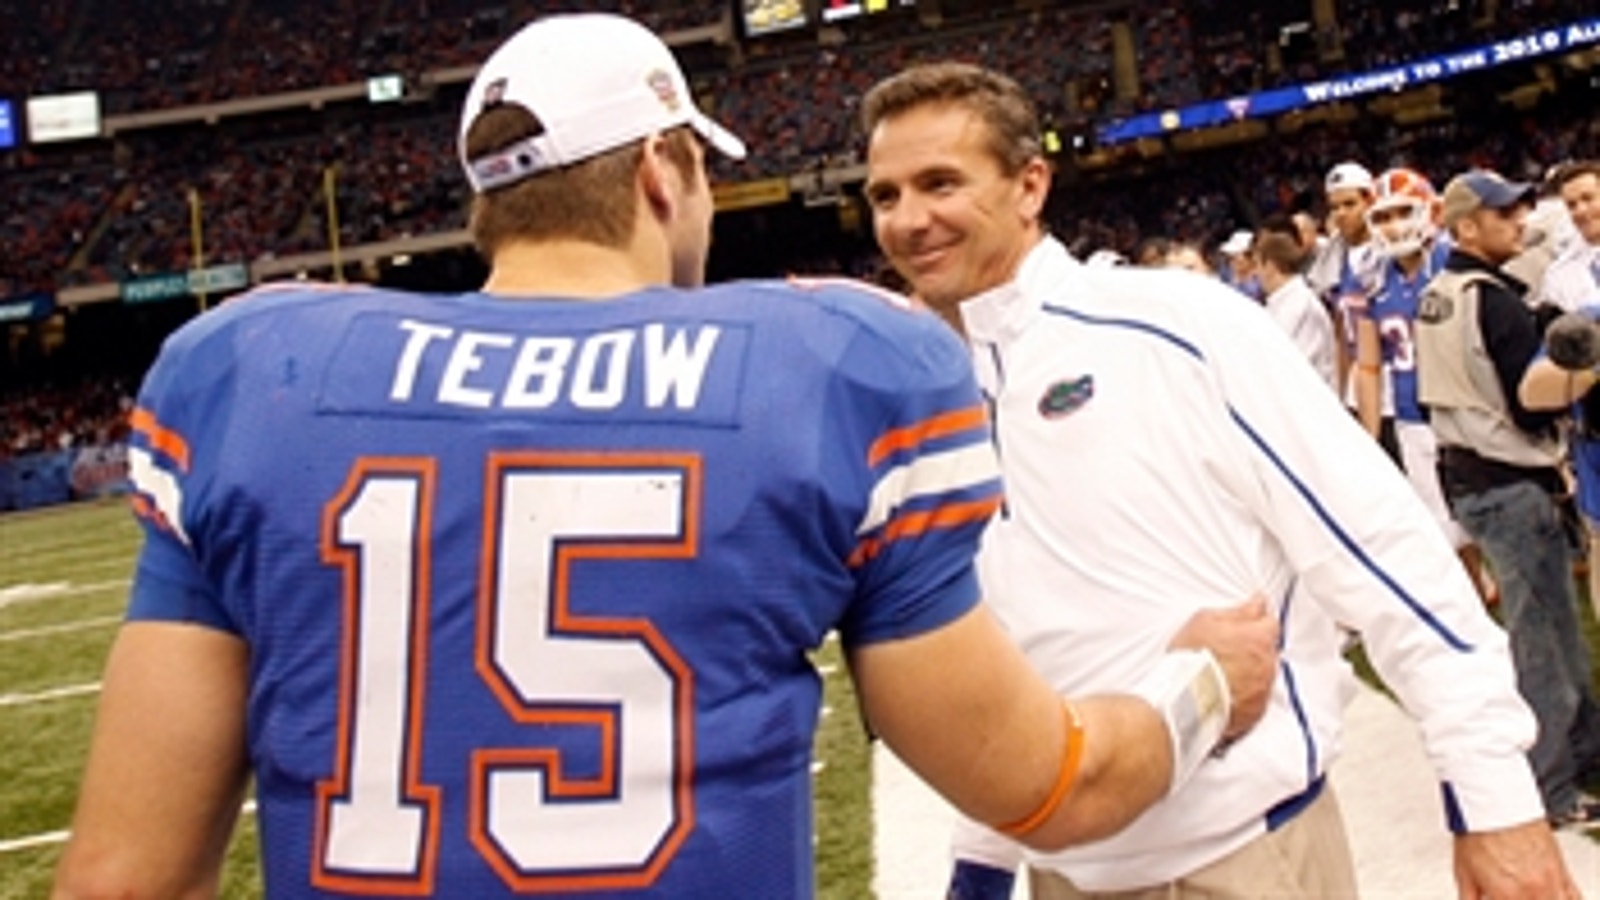 Urban Meyer was “really disappointed” that Tebow gave his “I Promise” speech | Ring Chronicles